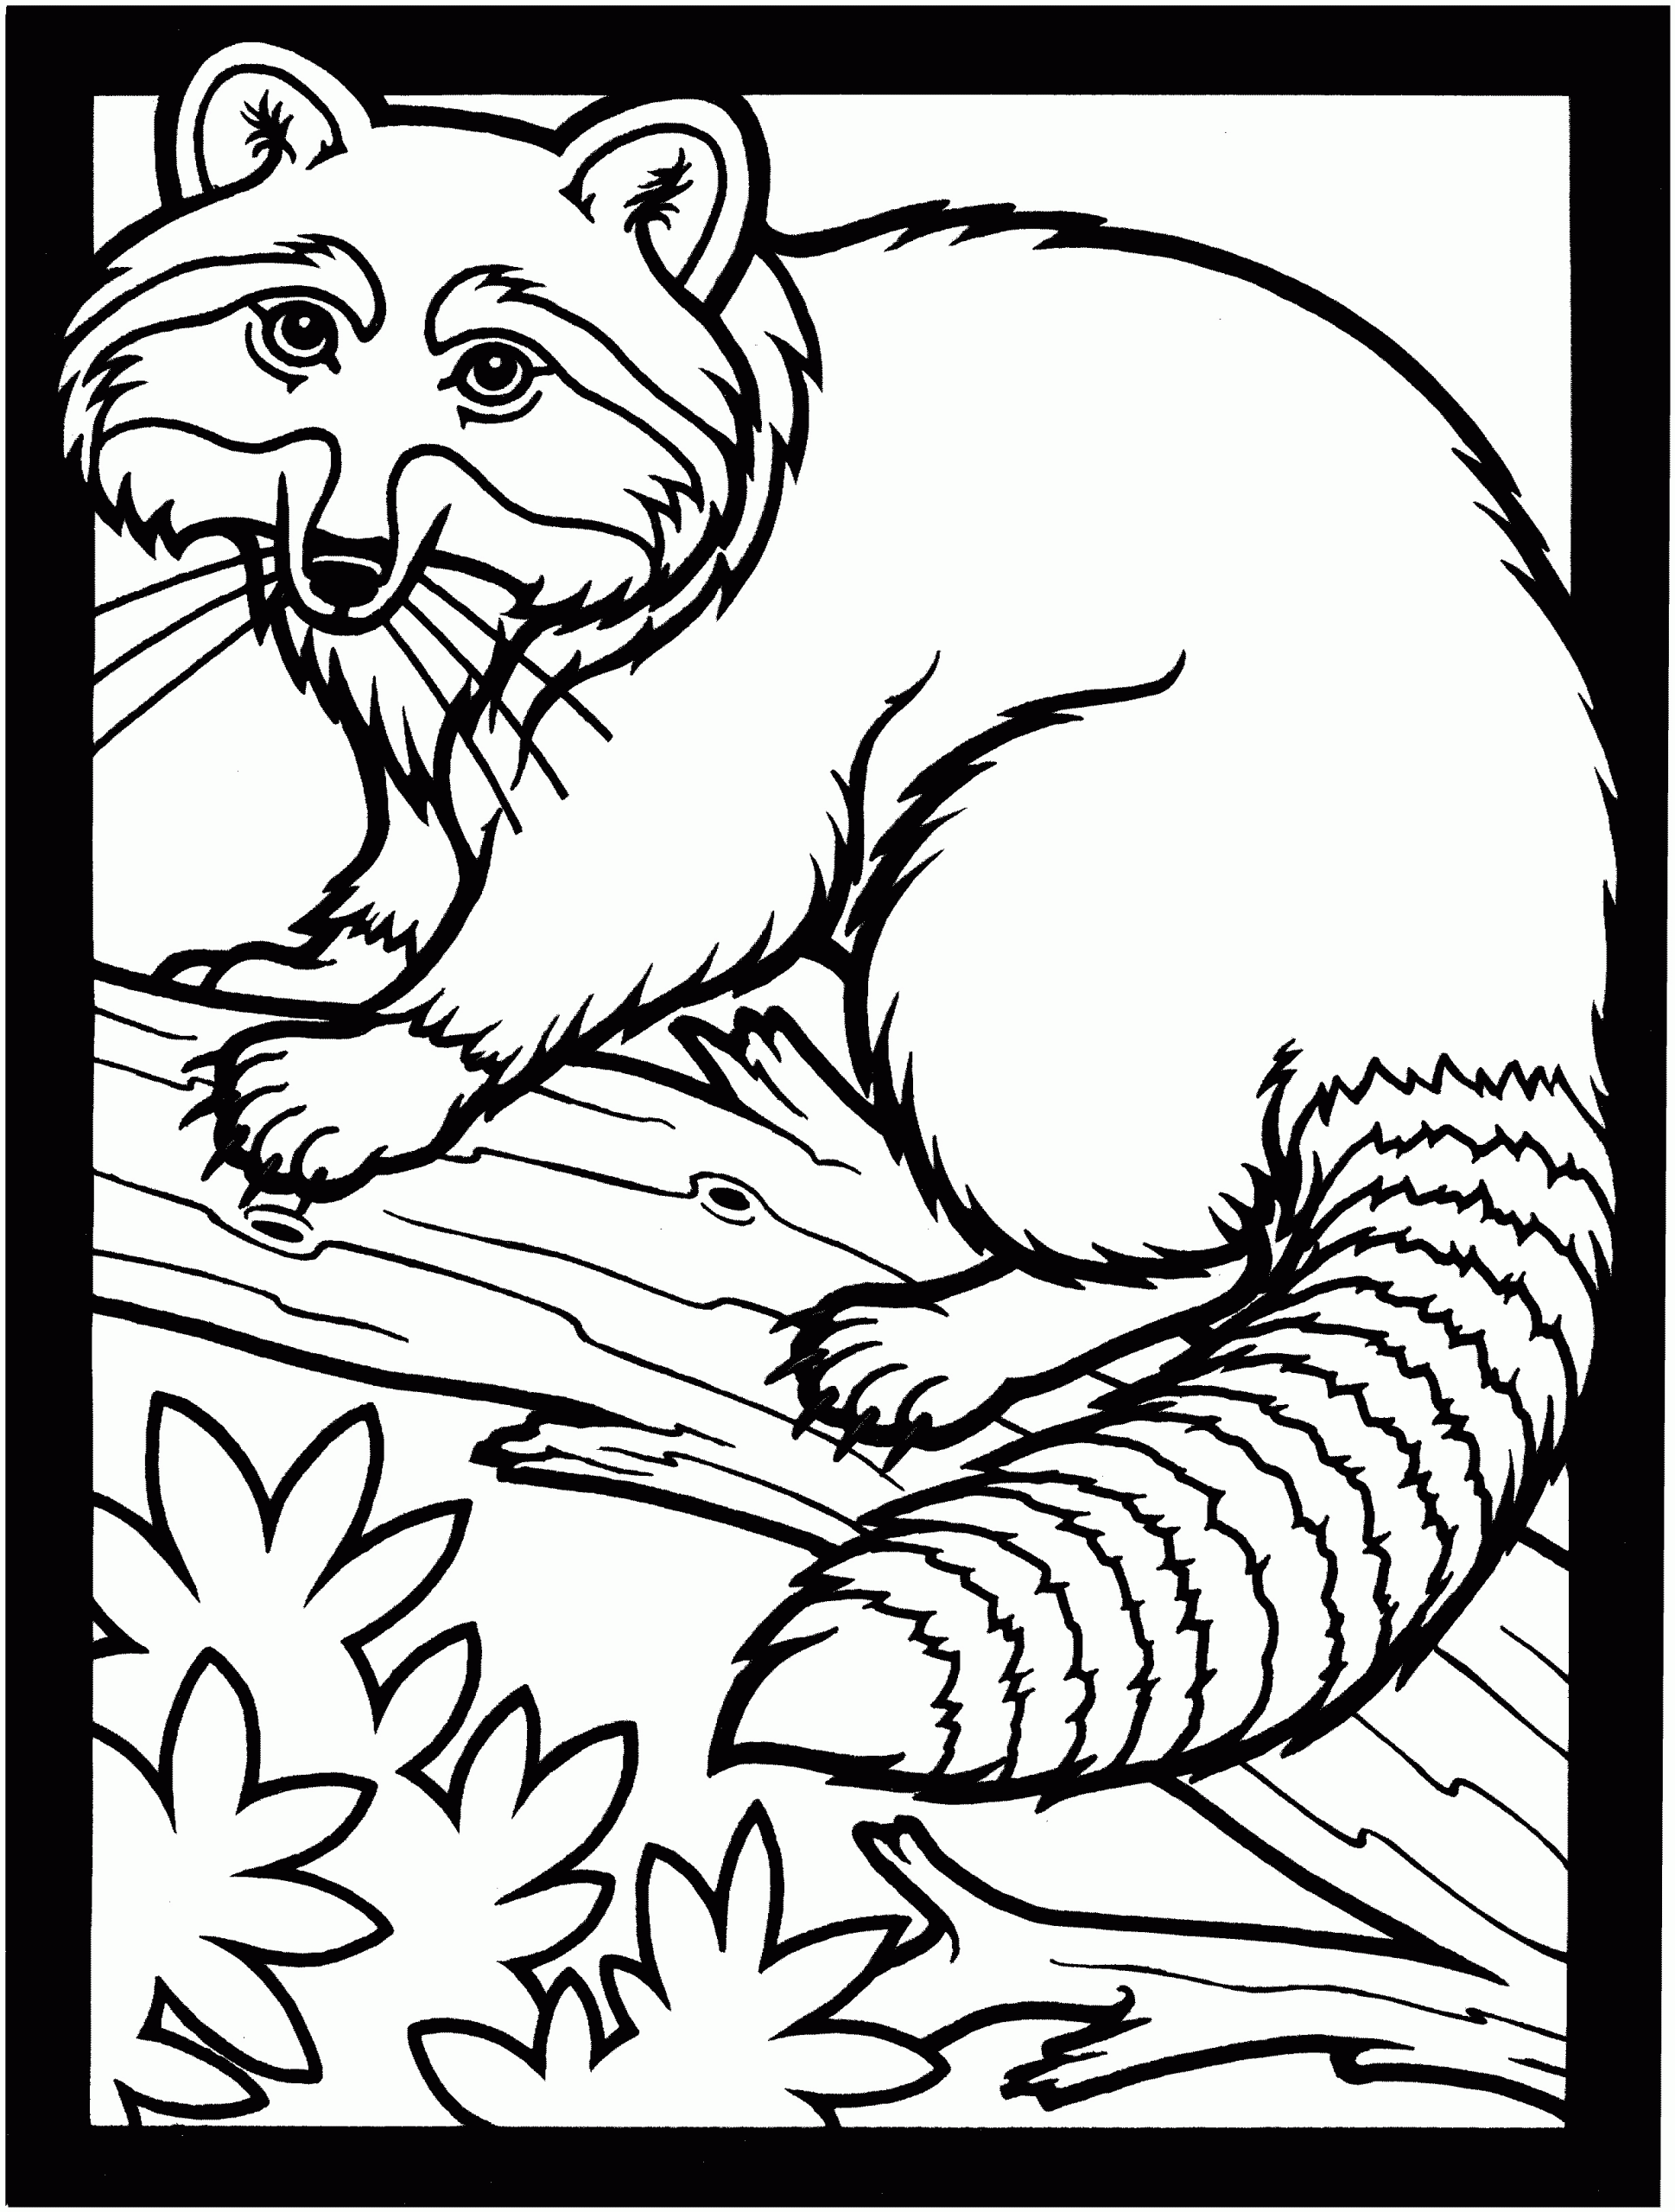 Coloring Sheet Free Printable
 Free Raccoon Coloring Pages